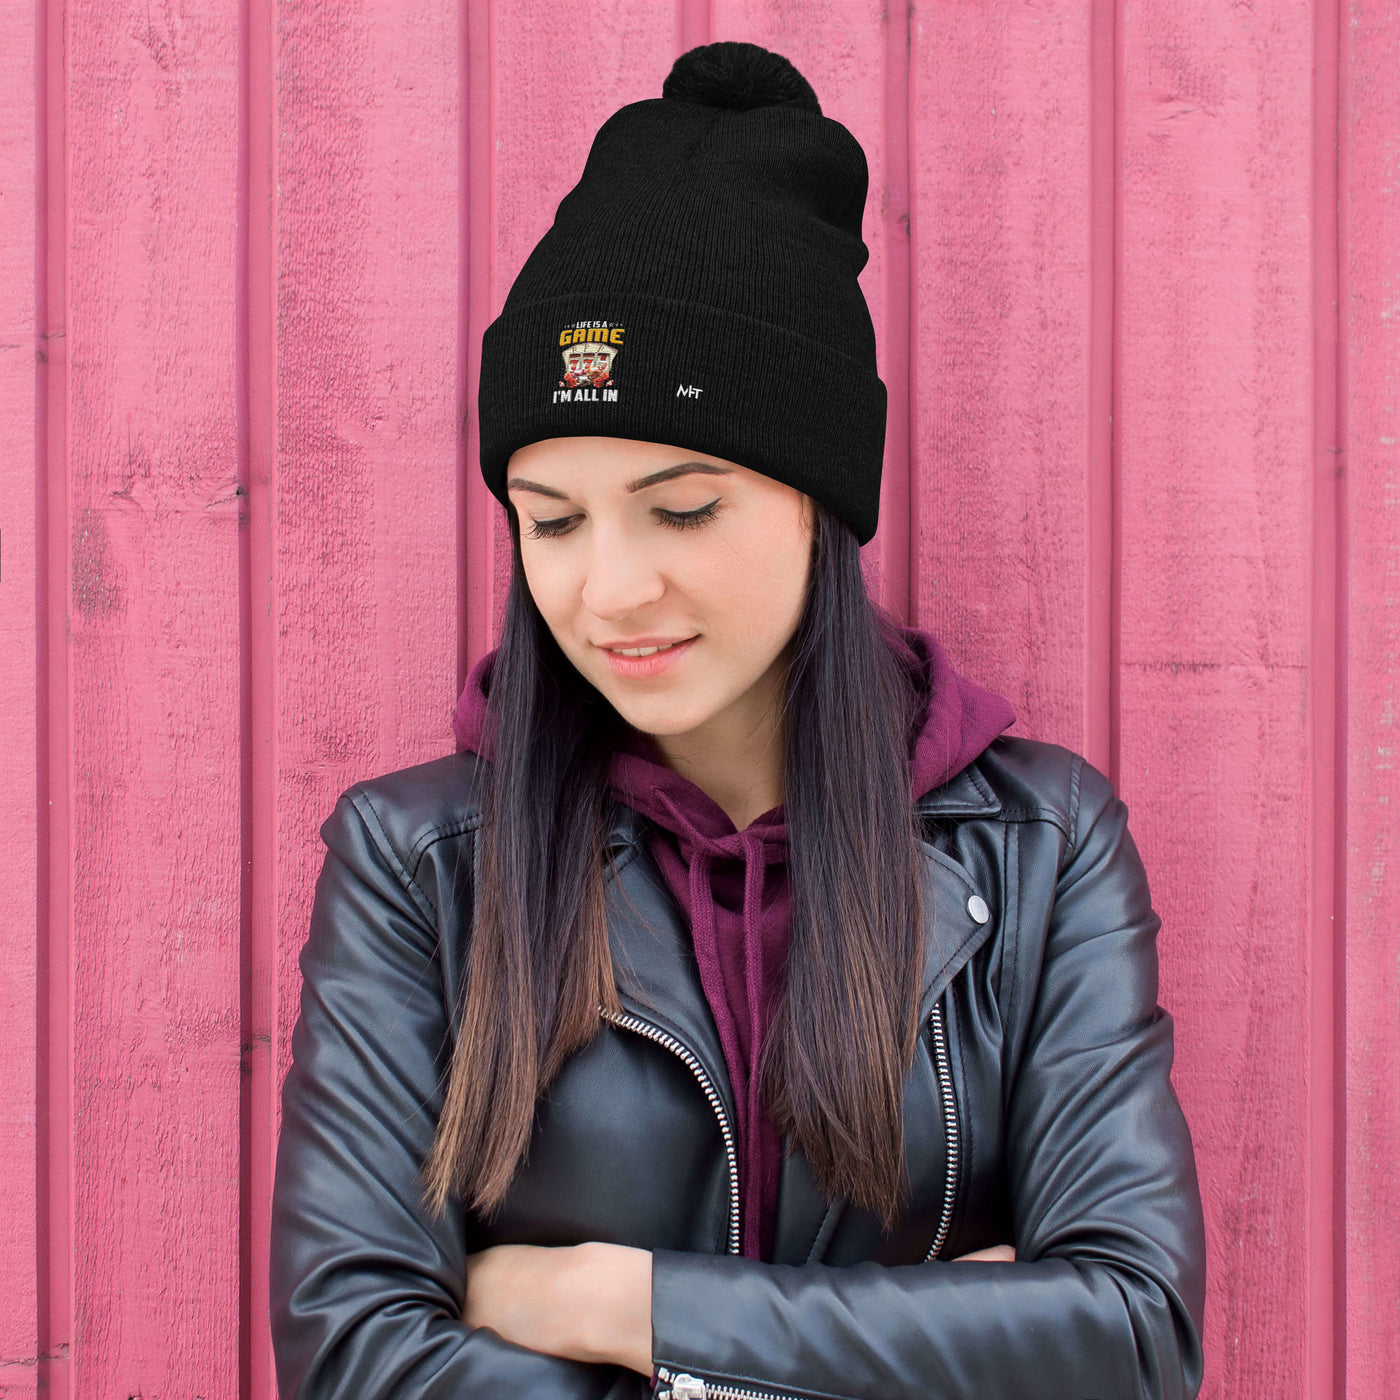 Life is a Game: I'm all in - Pom-Pom Beanie